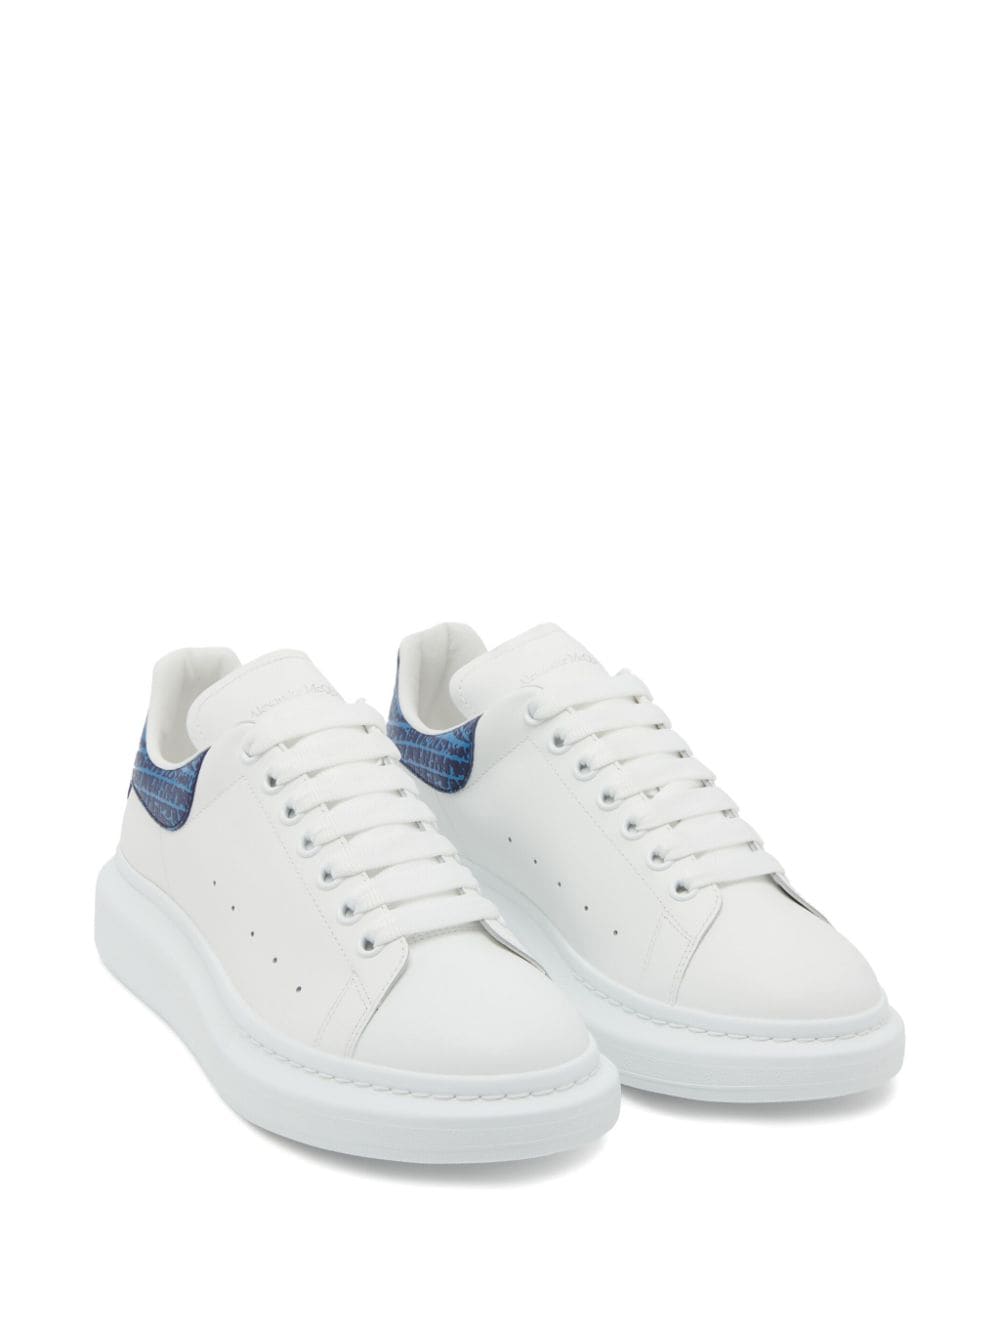 Shop Alexander Mcqueen Panelled Leather Sneakers In White/lapis Blue